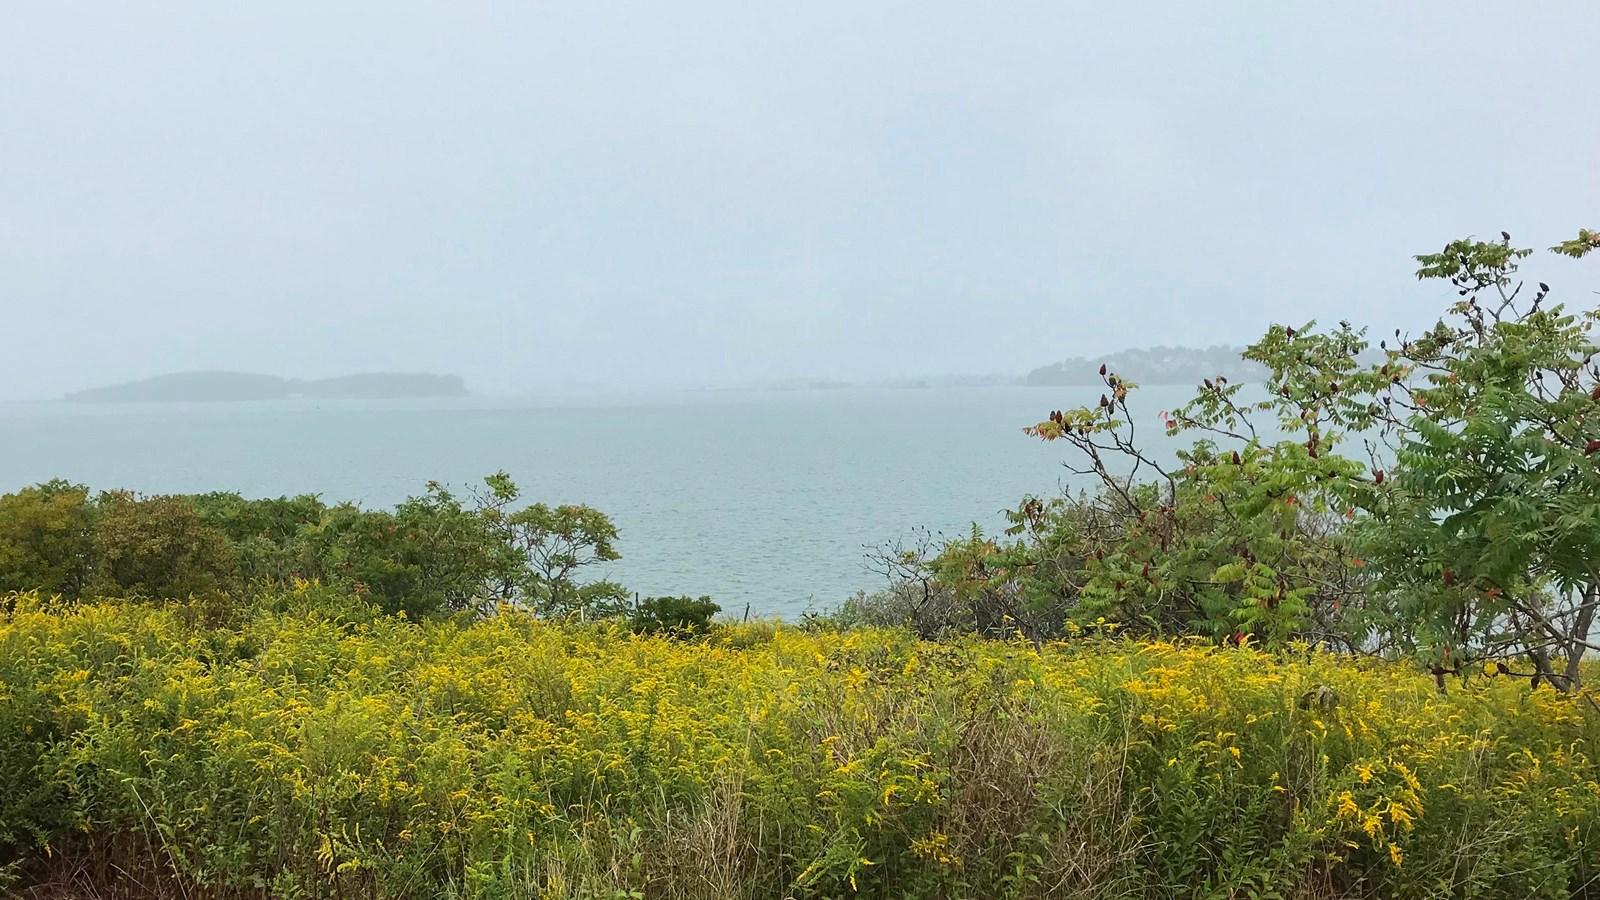 View of the Boston Harbor standing on green grass on Bumpkin Island